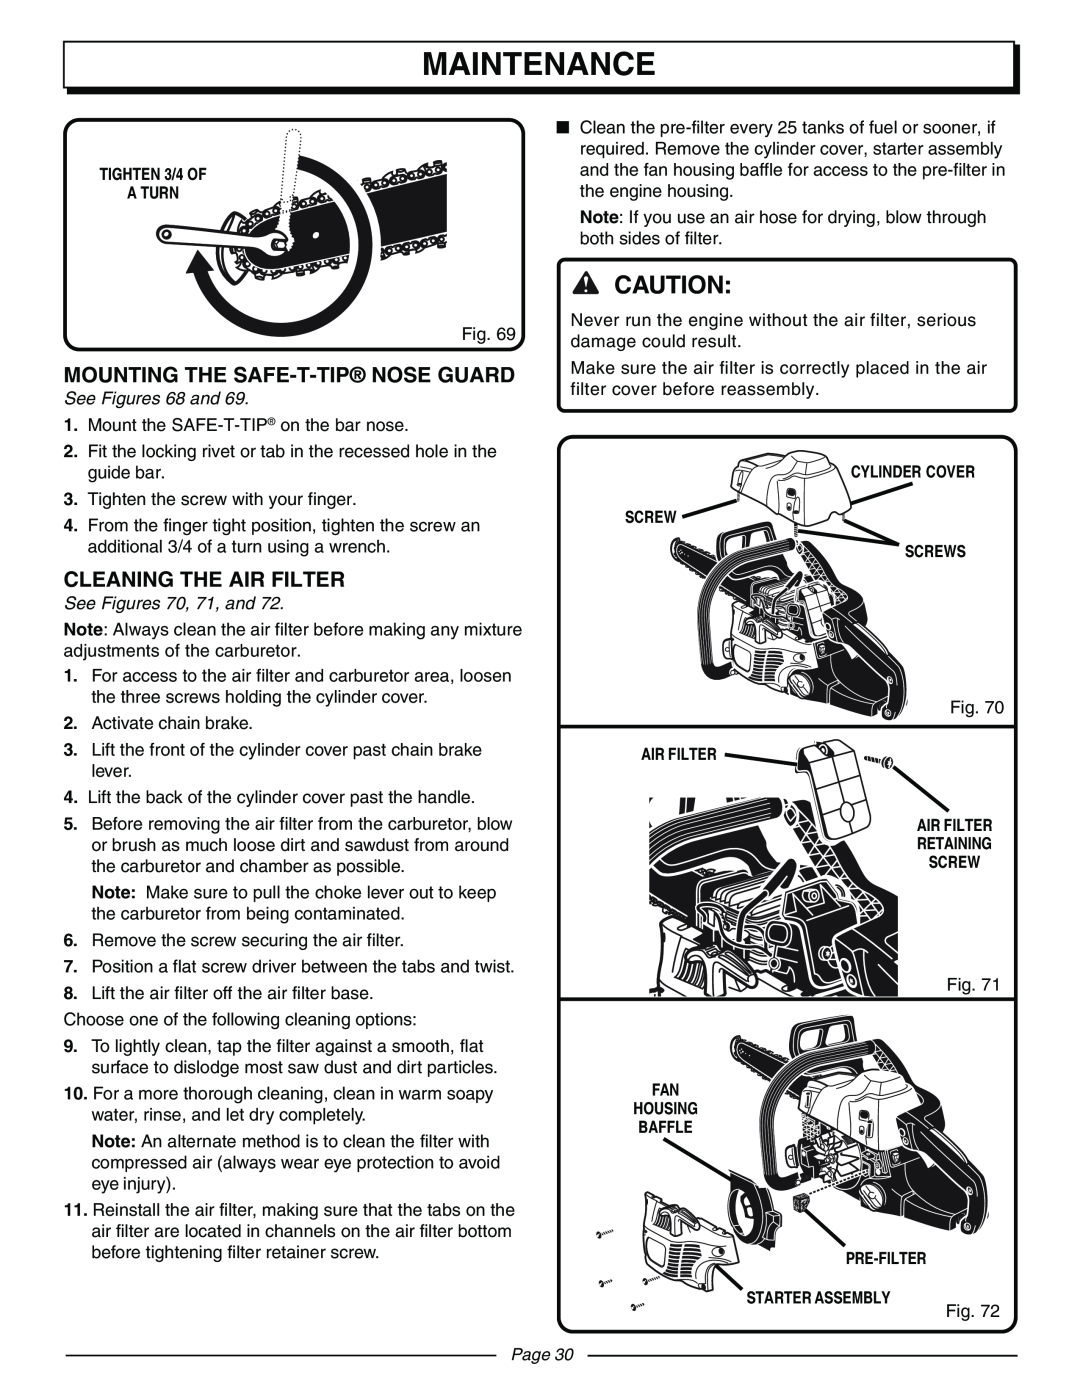 Homelite UT10942D manual Mounting The Safe-T-Tipnose Guard, Cleaning The Air Filter, Maintenance, See Figures 68 and, Page 